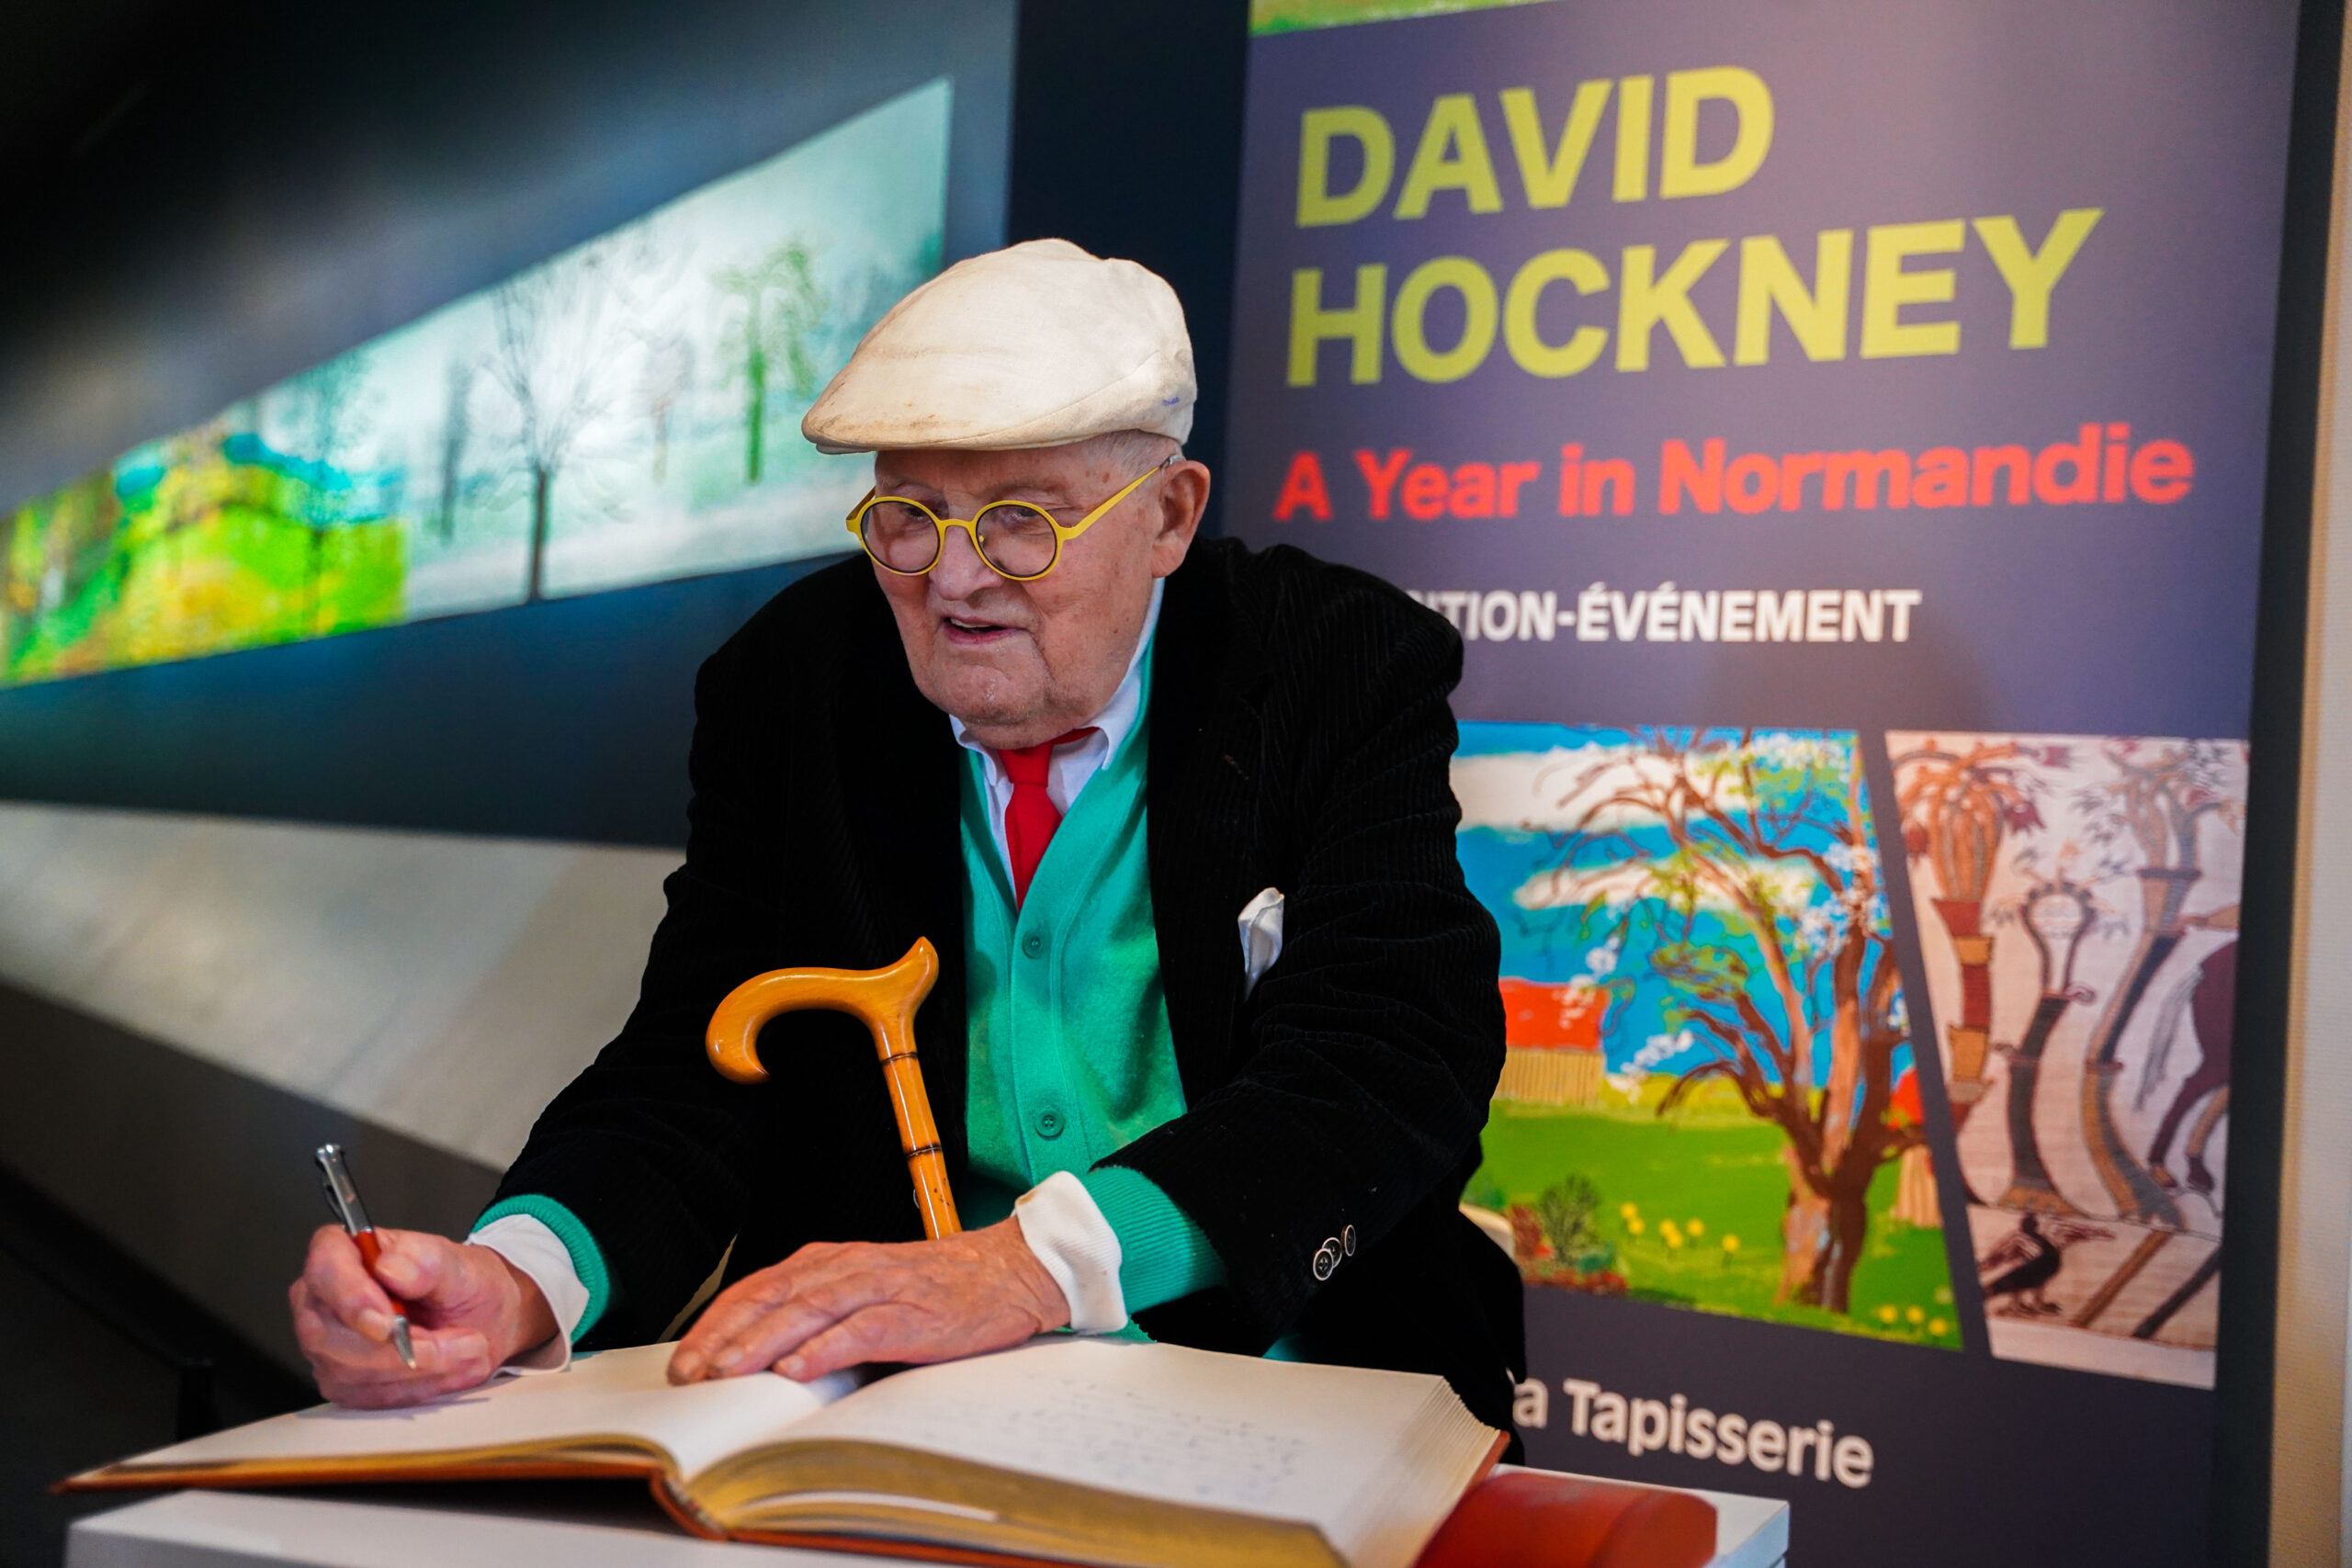 A Year in Normandie David Hockney in Bayeux Complete France